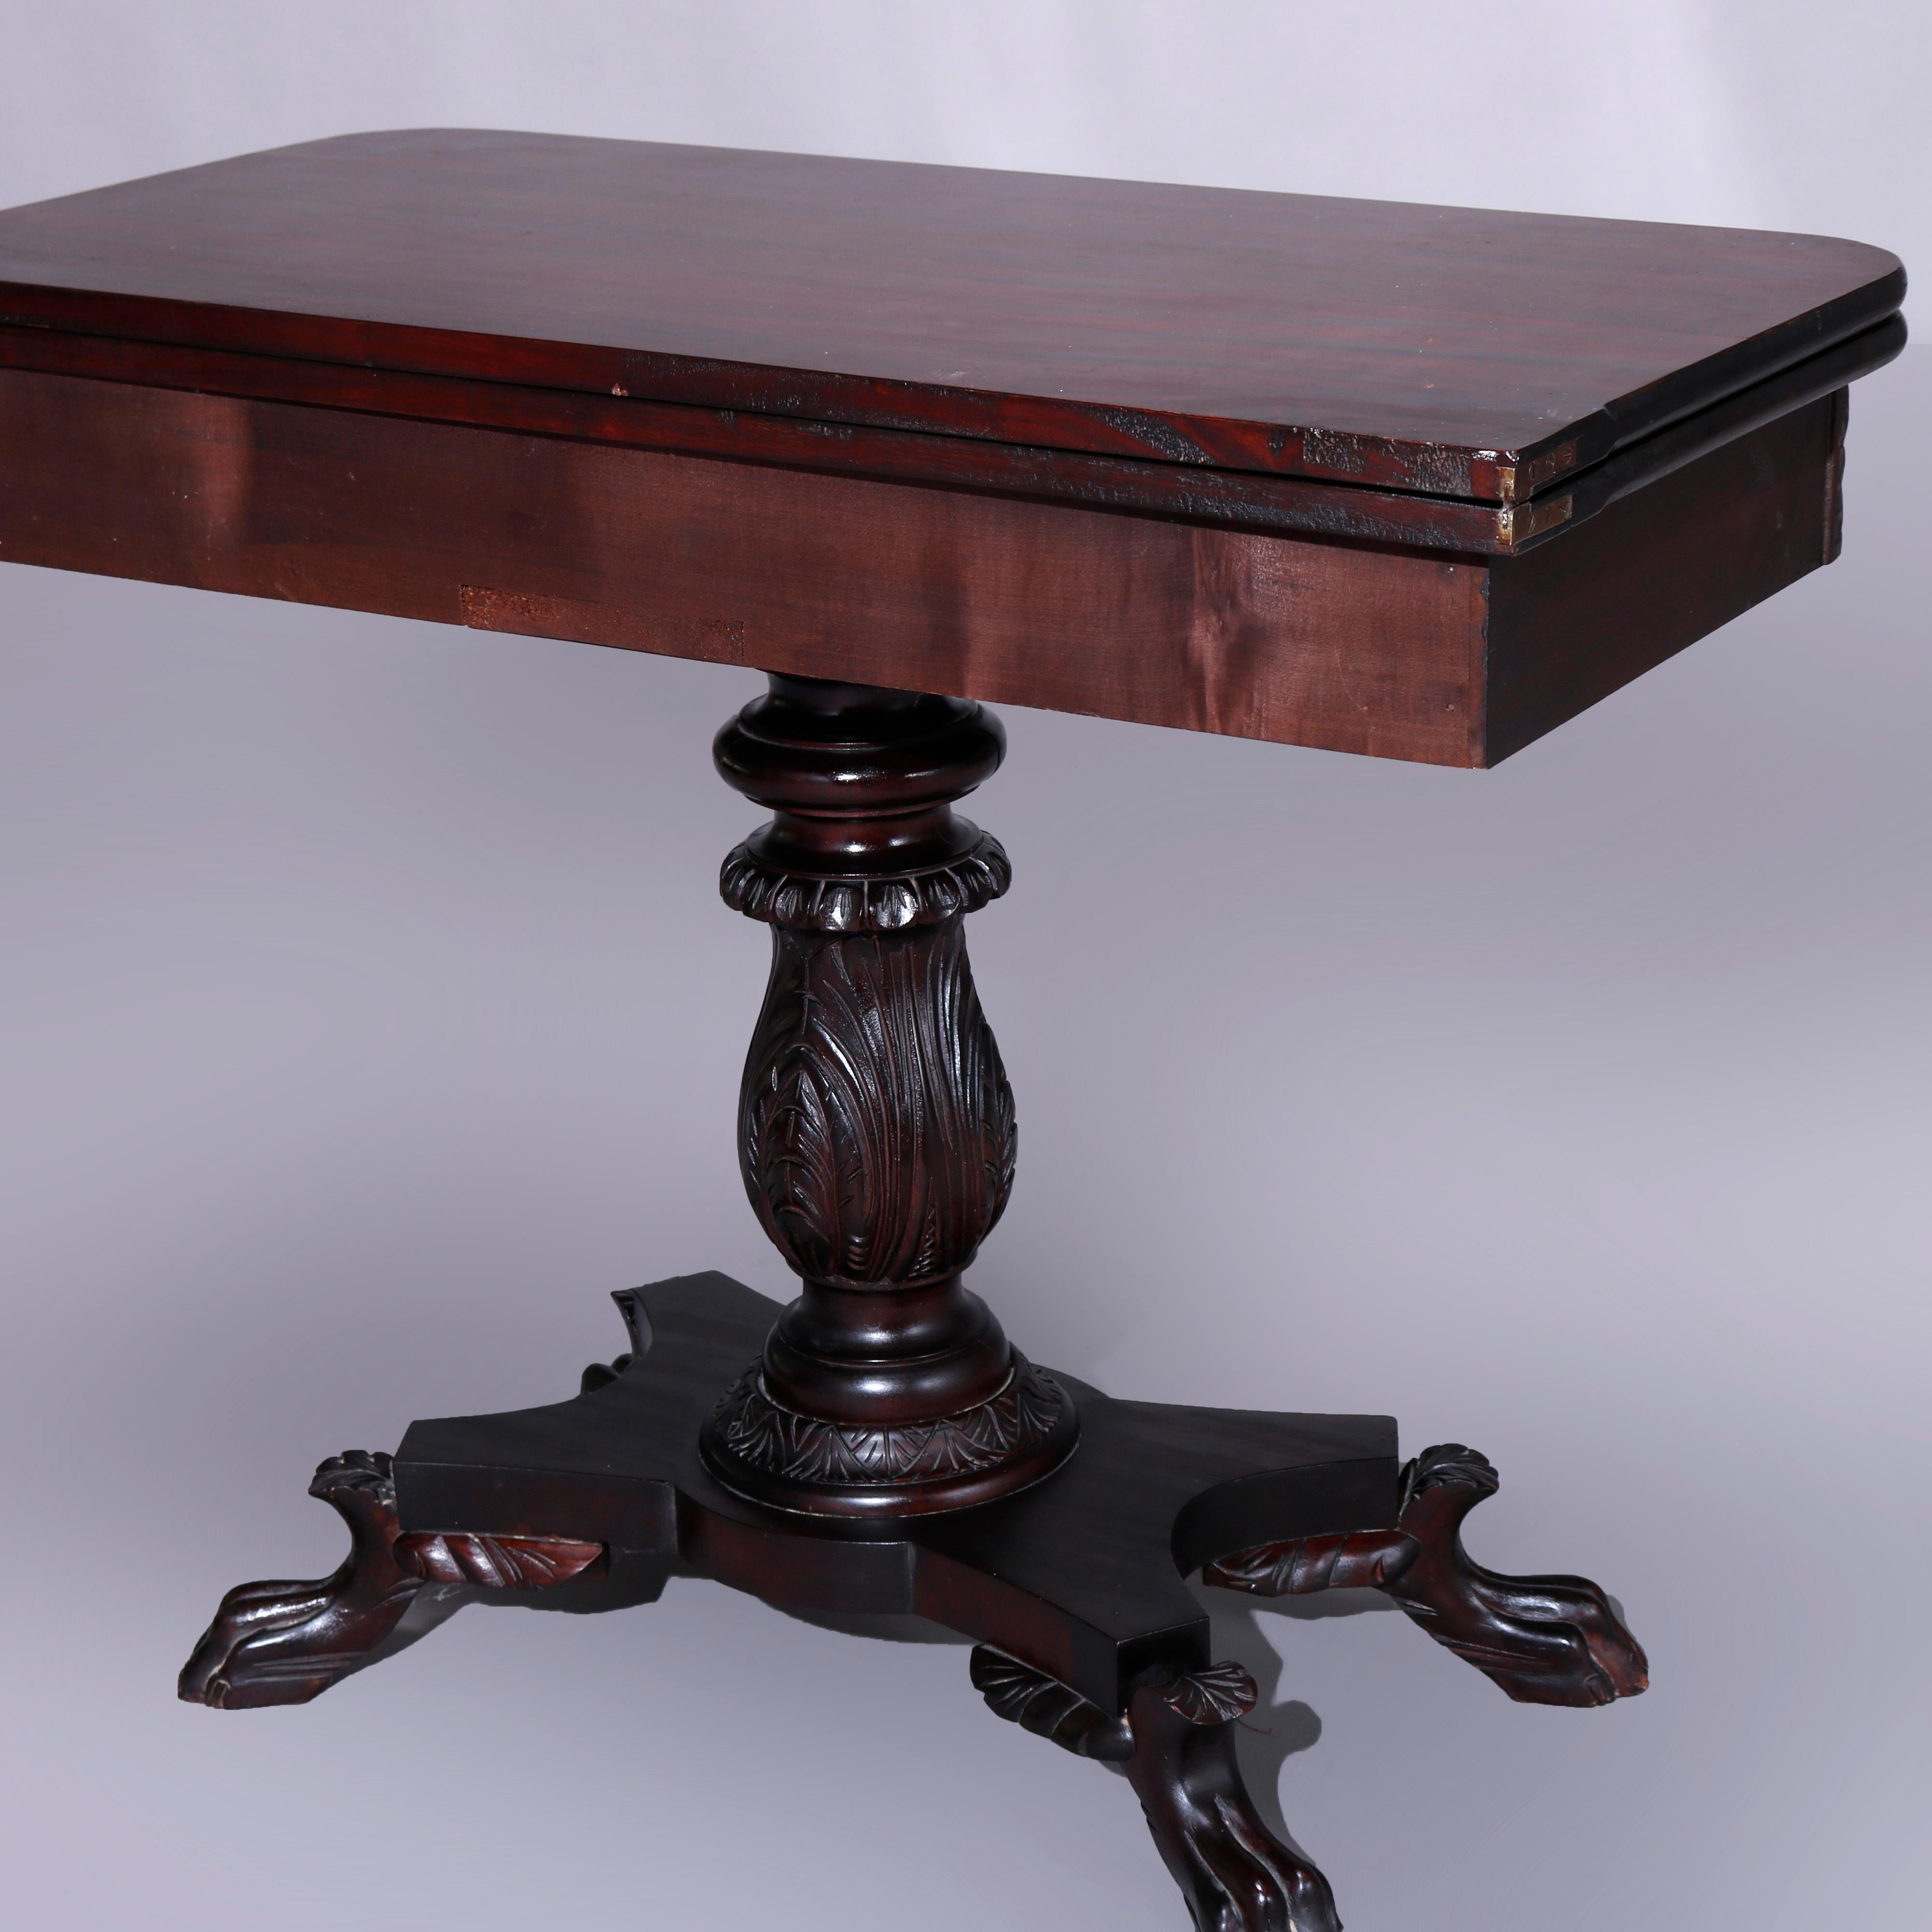 Antique American Empire Classical Carved Mahogany Claw Foot Card Table c1840 1